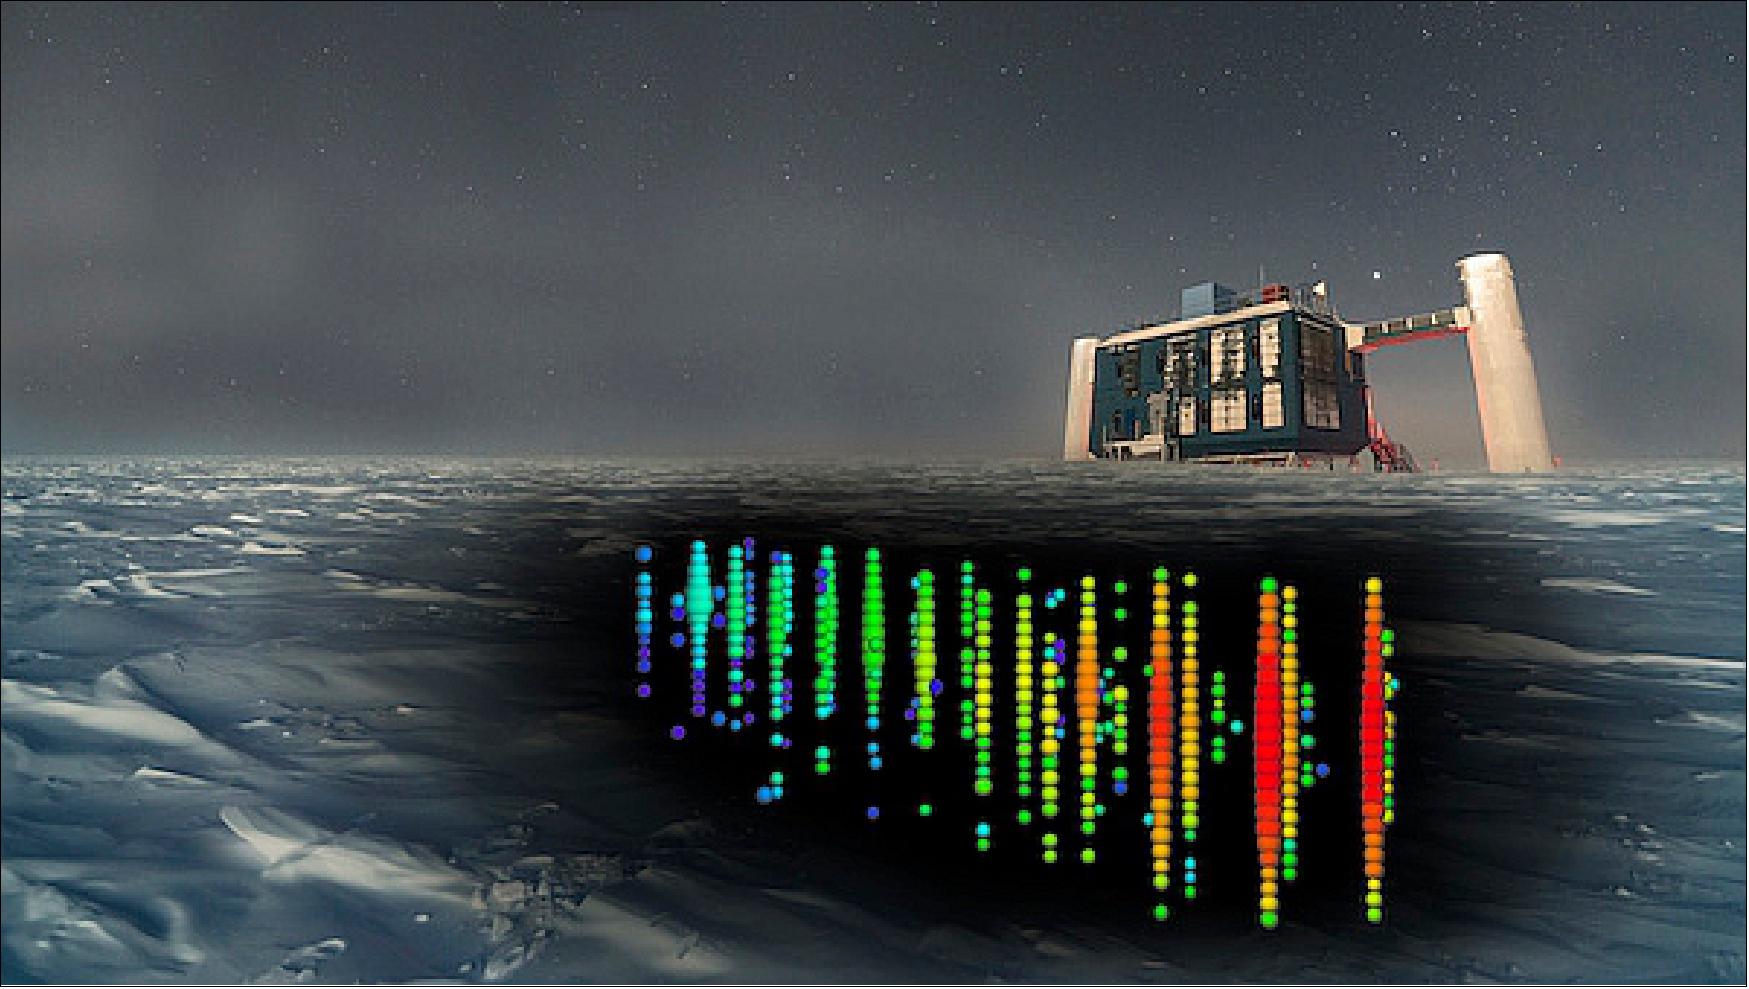 Figure 22: Neutrino detection at the IceCube observatory (image credit: IceCube Collaboration/NSF)